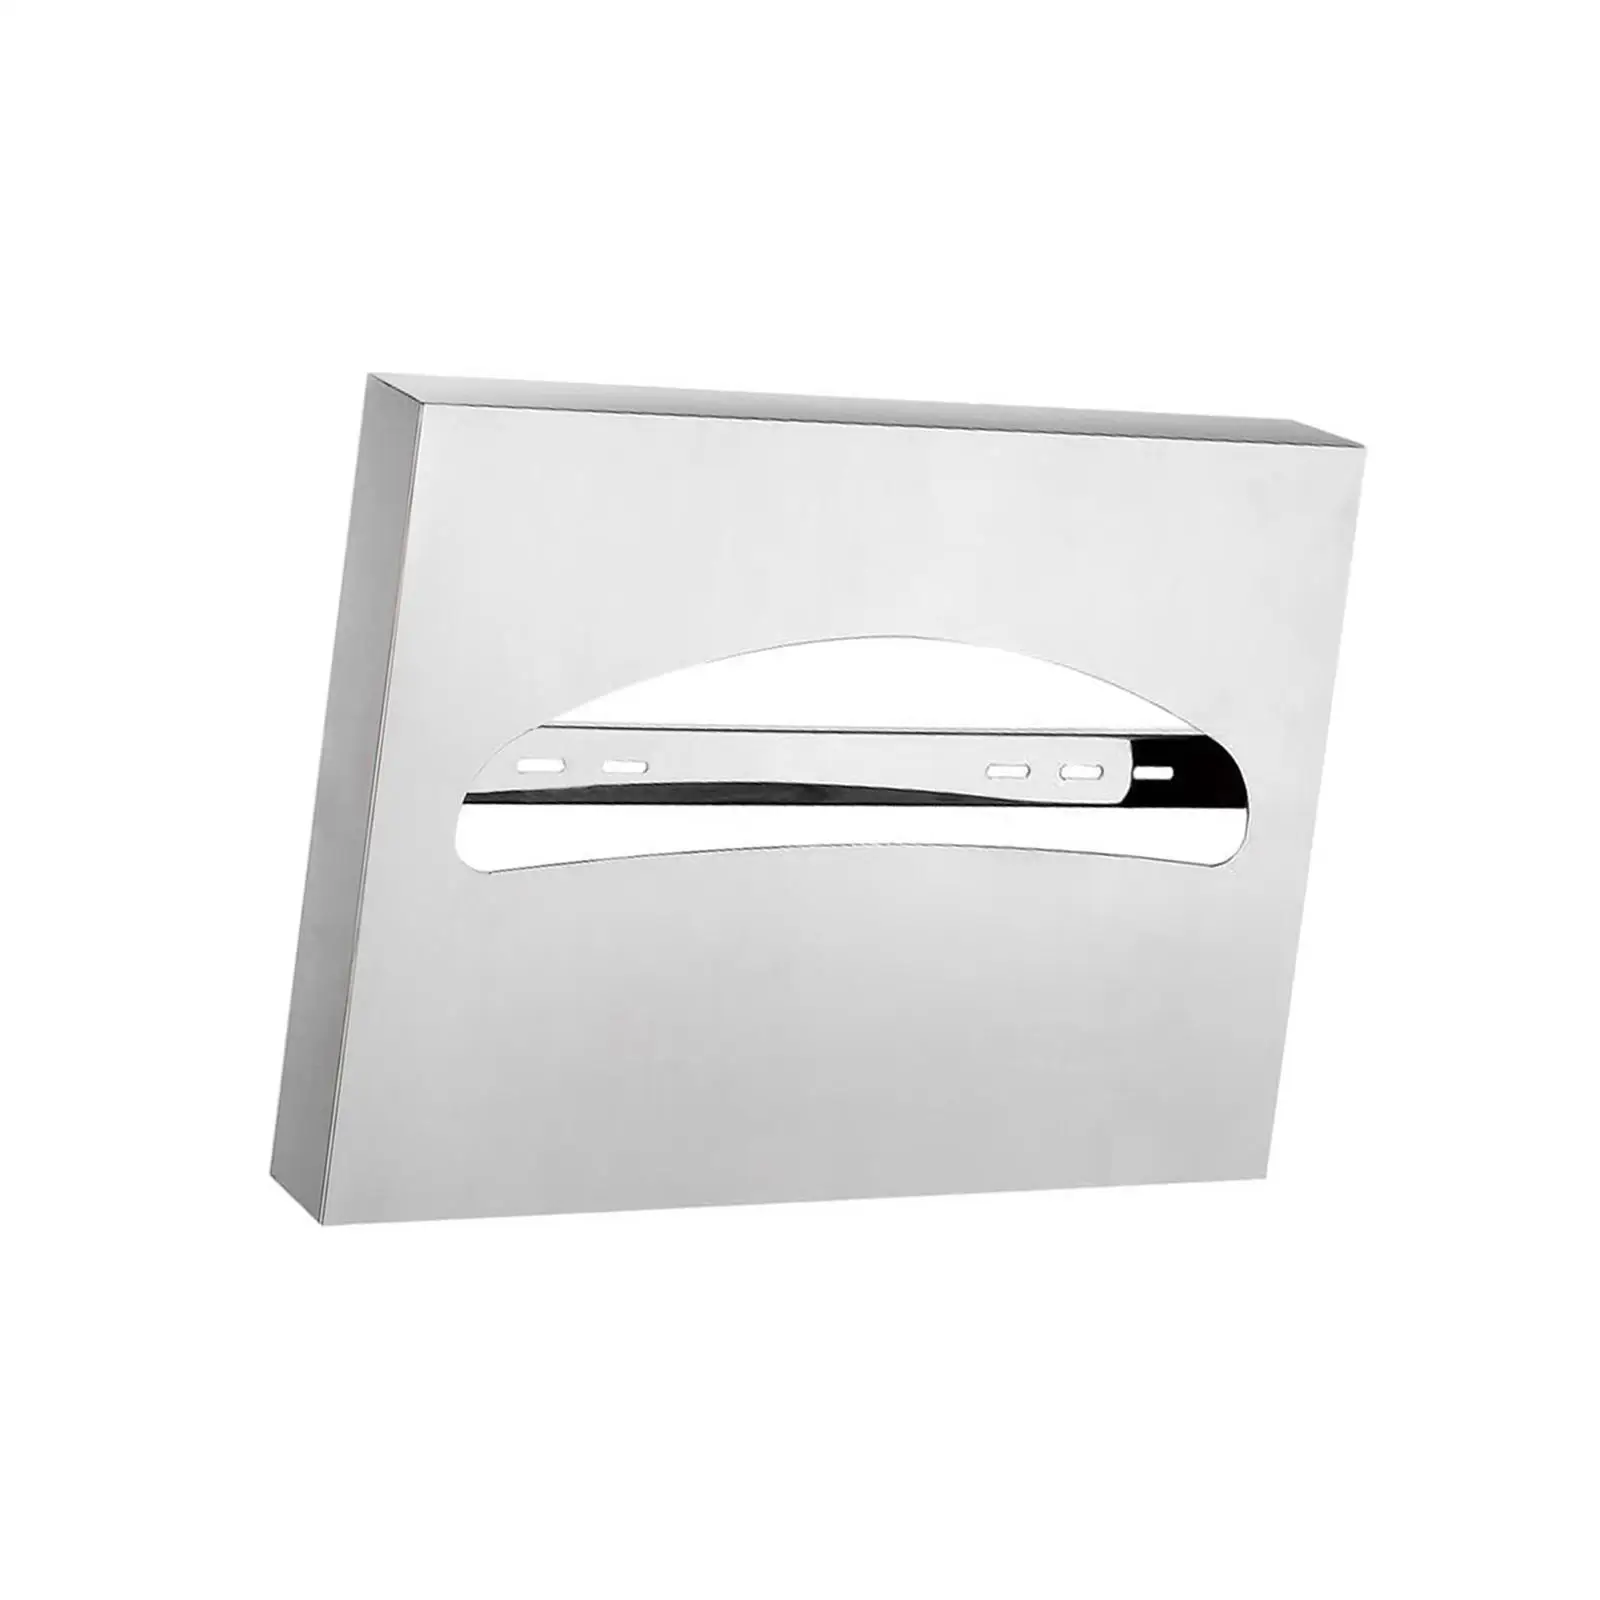 Toilet Seat Covers Dispenser Practical Wall Mounted for Bathroom Office